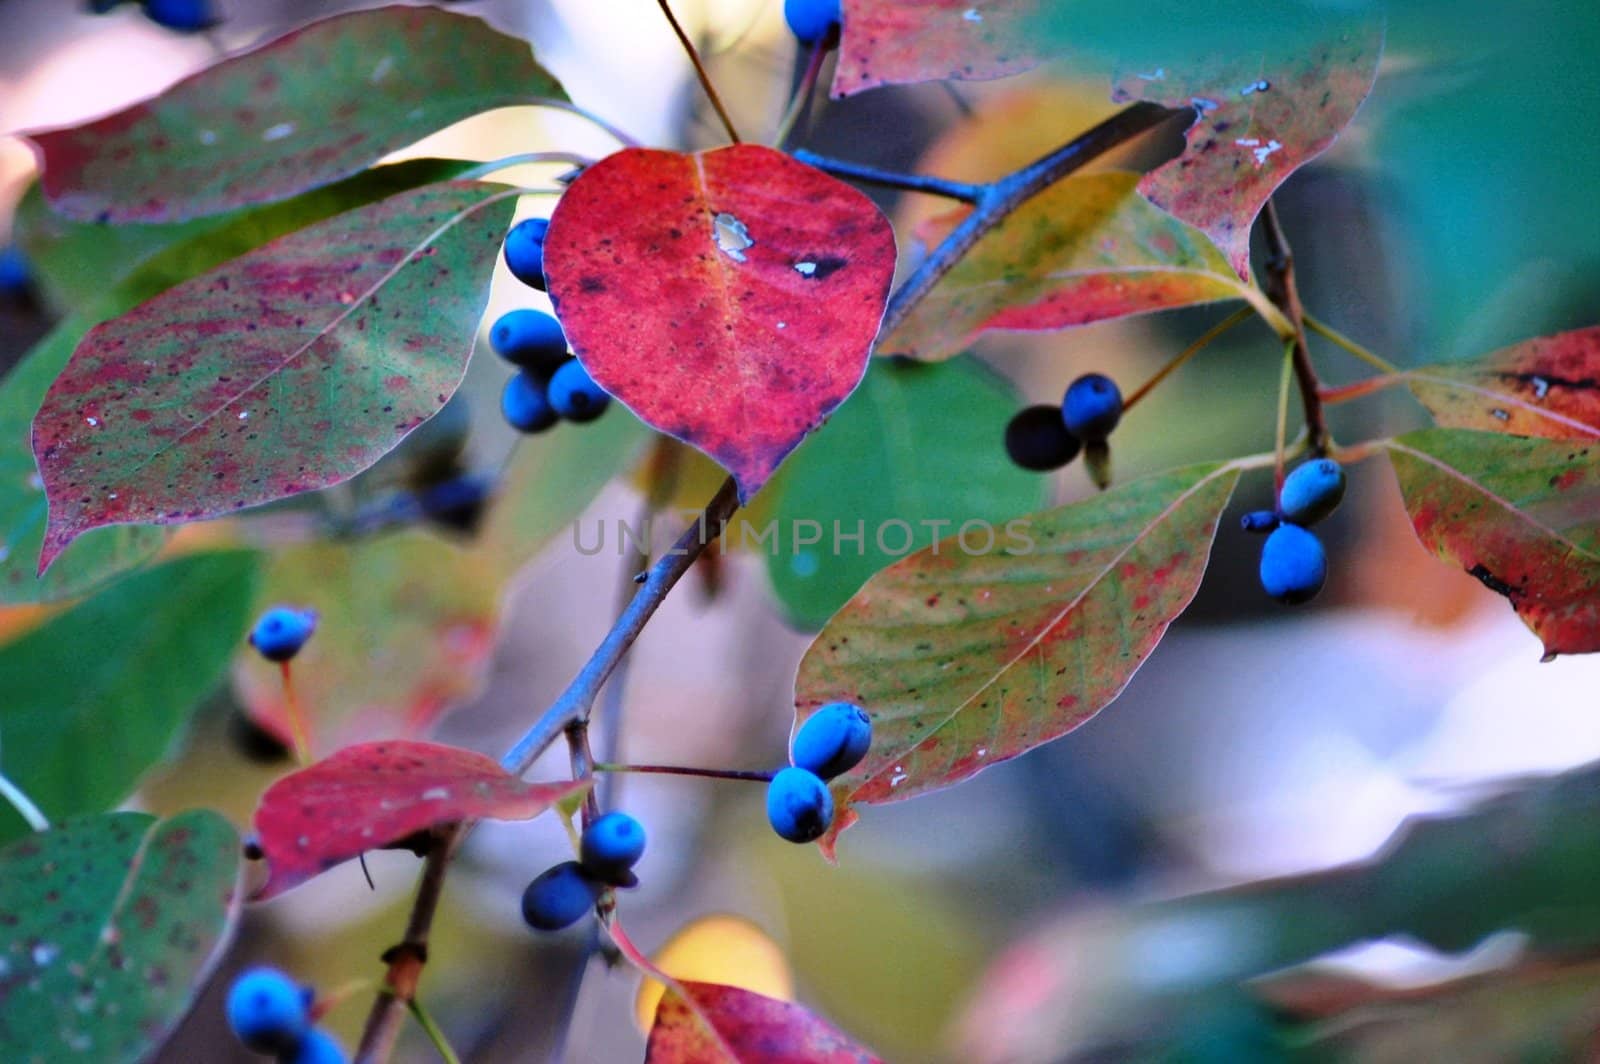 Plant - leaves and berries by RefocusPhoto